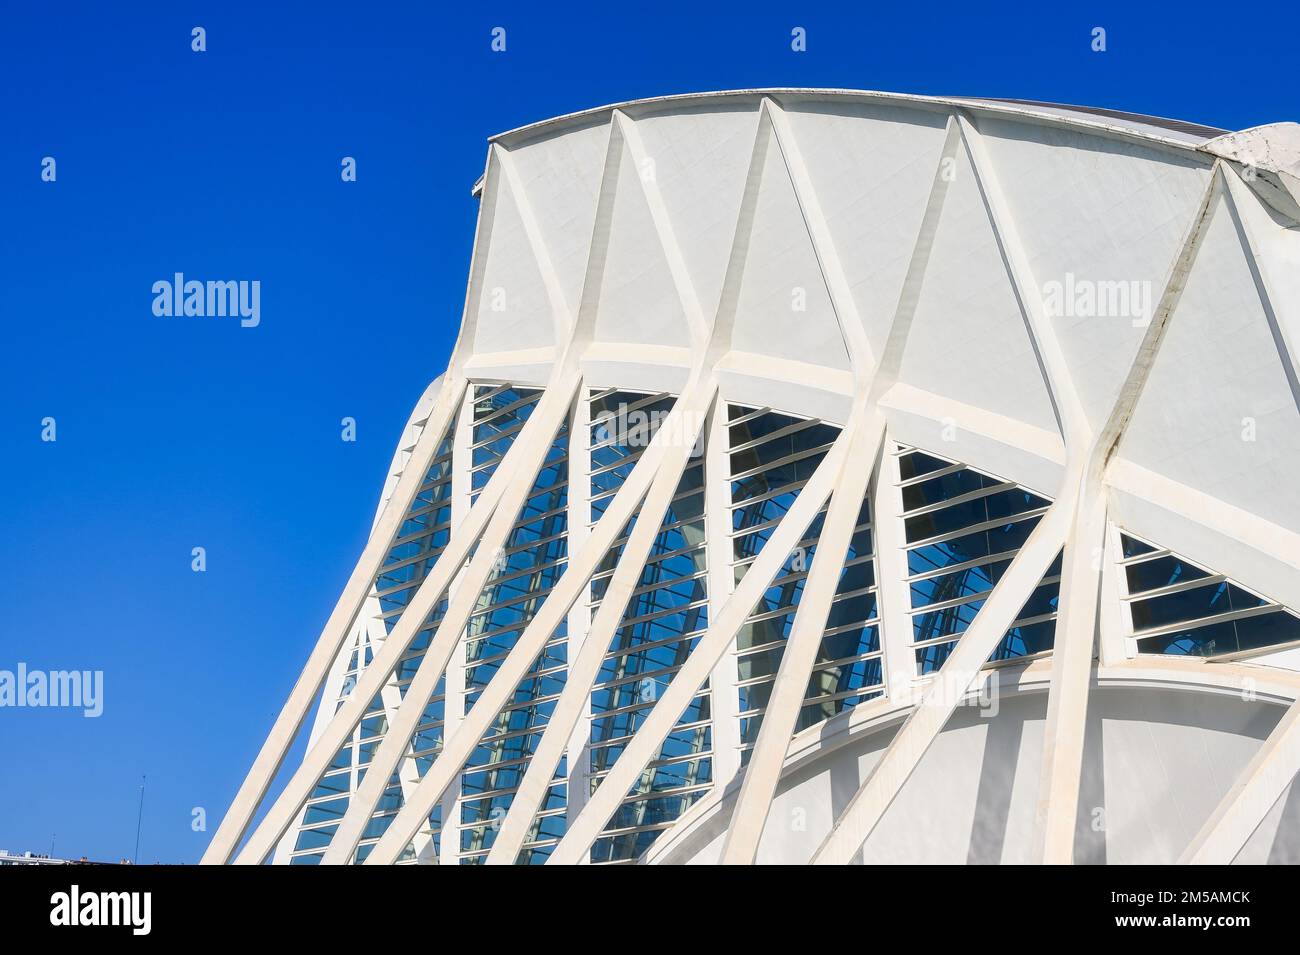 Support pillars. Modern design architecture by Santiago Calatrava. Abstract architectural feature of the international landmark and tourist attraction Stock Photo